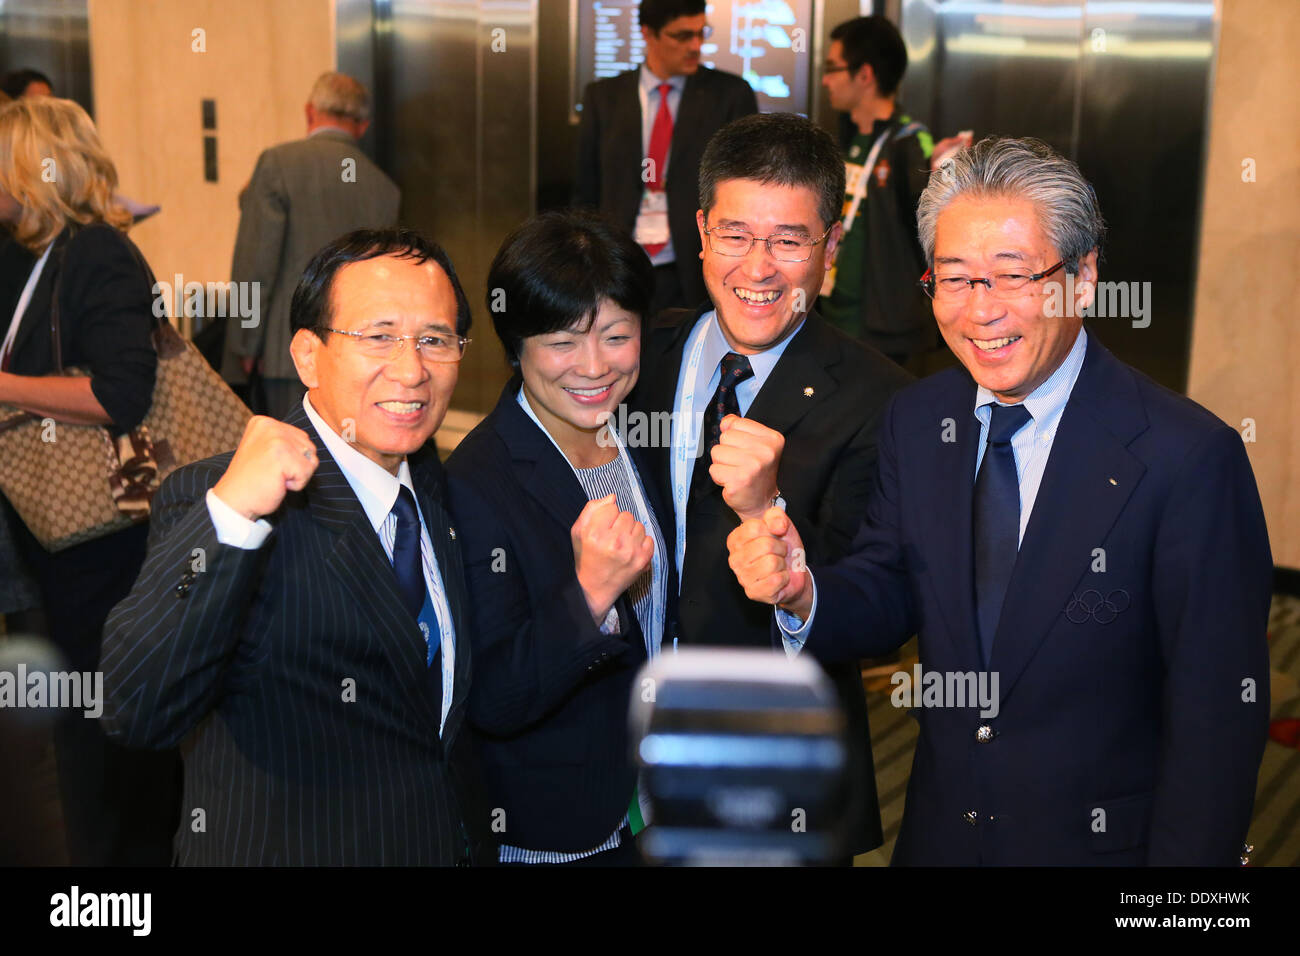 (L to R) Tomiaki Fukuda, Hitomi Obara, Tsunekazu Takeda, SEPTEMBER 8, 2013 : International Olympic Committee (IOC) President Jacques Rogge announces Wrestling the winning sport for the 2020 Summer Olympic Games during the 125th International Olympic Committee (IOC) session in Buenos Aires Argentina, on Saturday September 8, 2013. © YUTAKA/AFLO SPORT/Alamy Live News Stock Photo